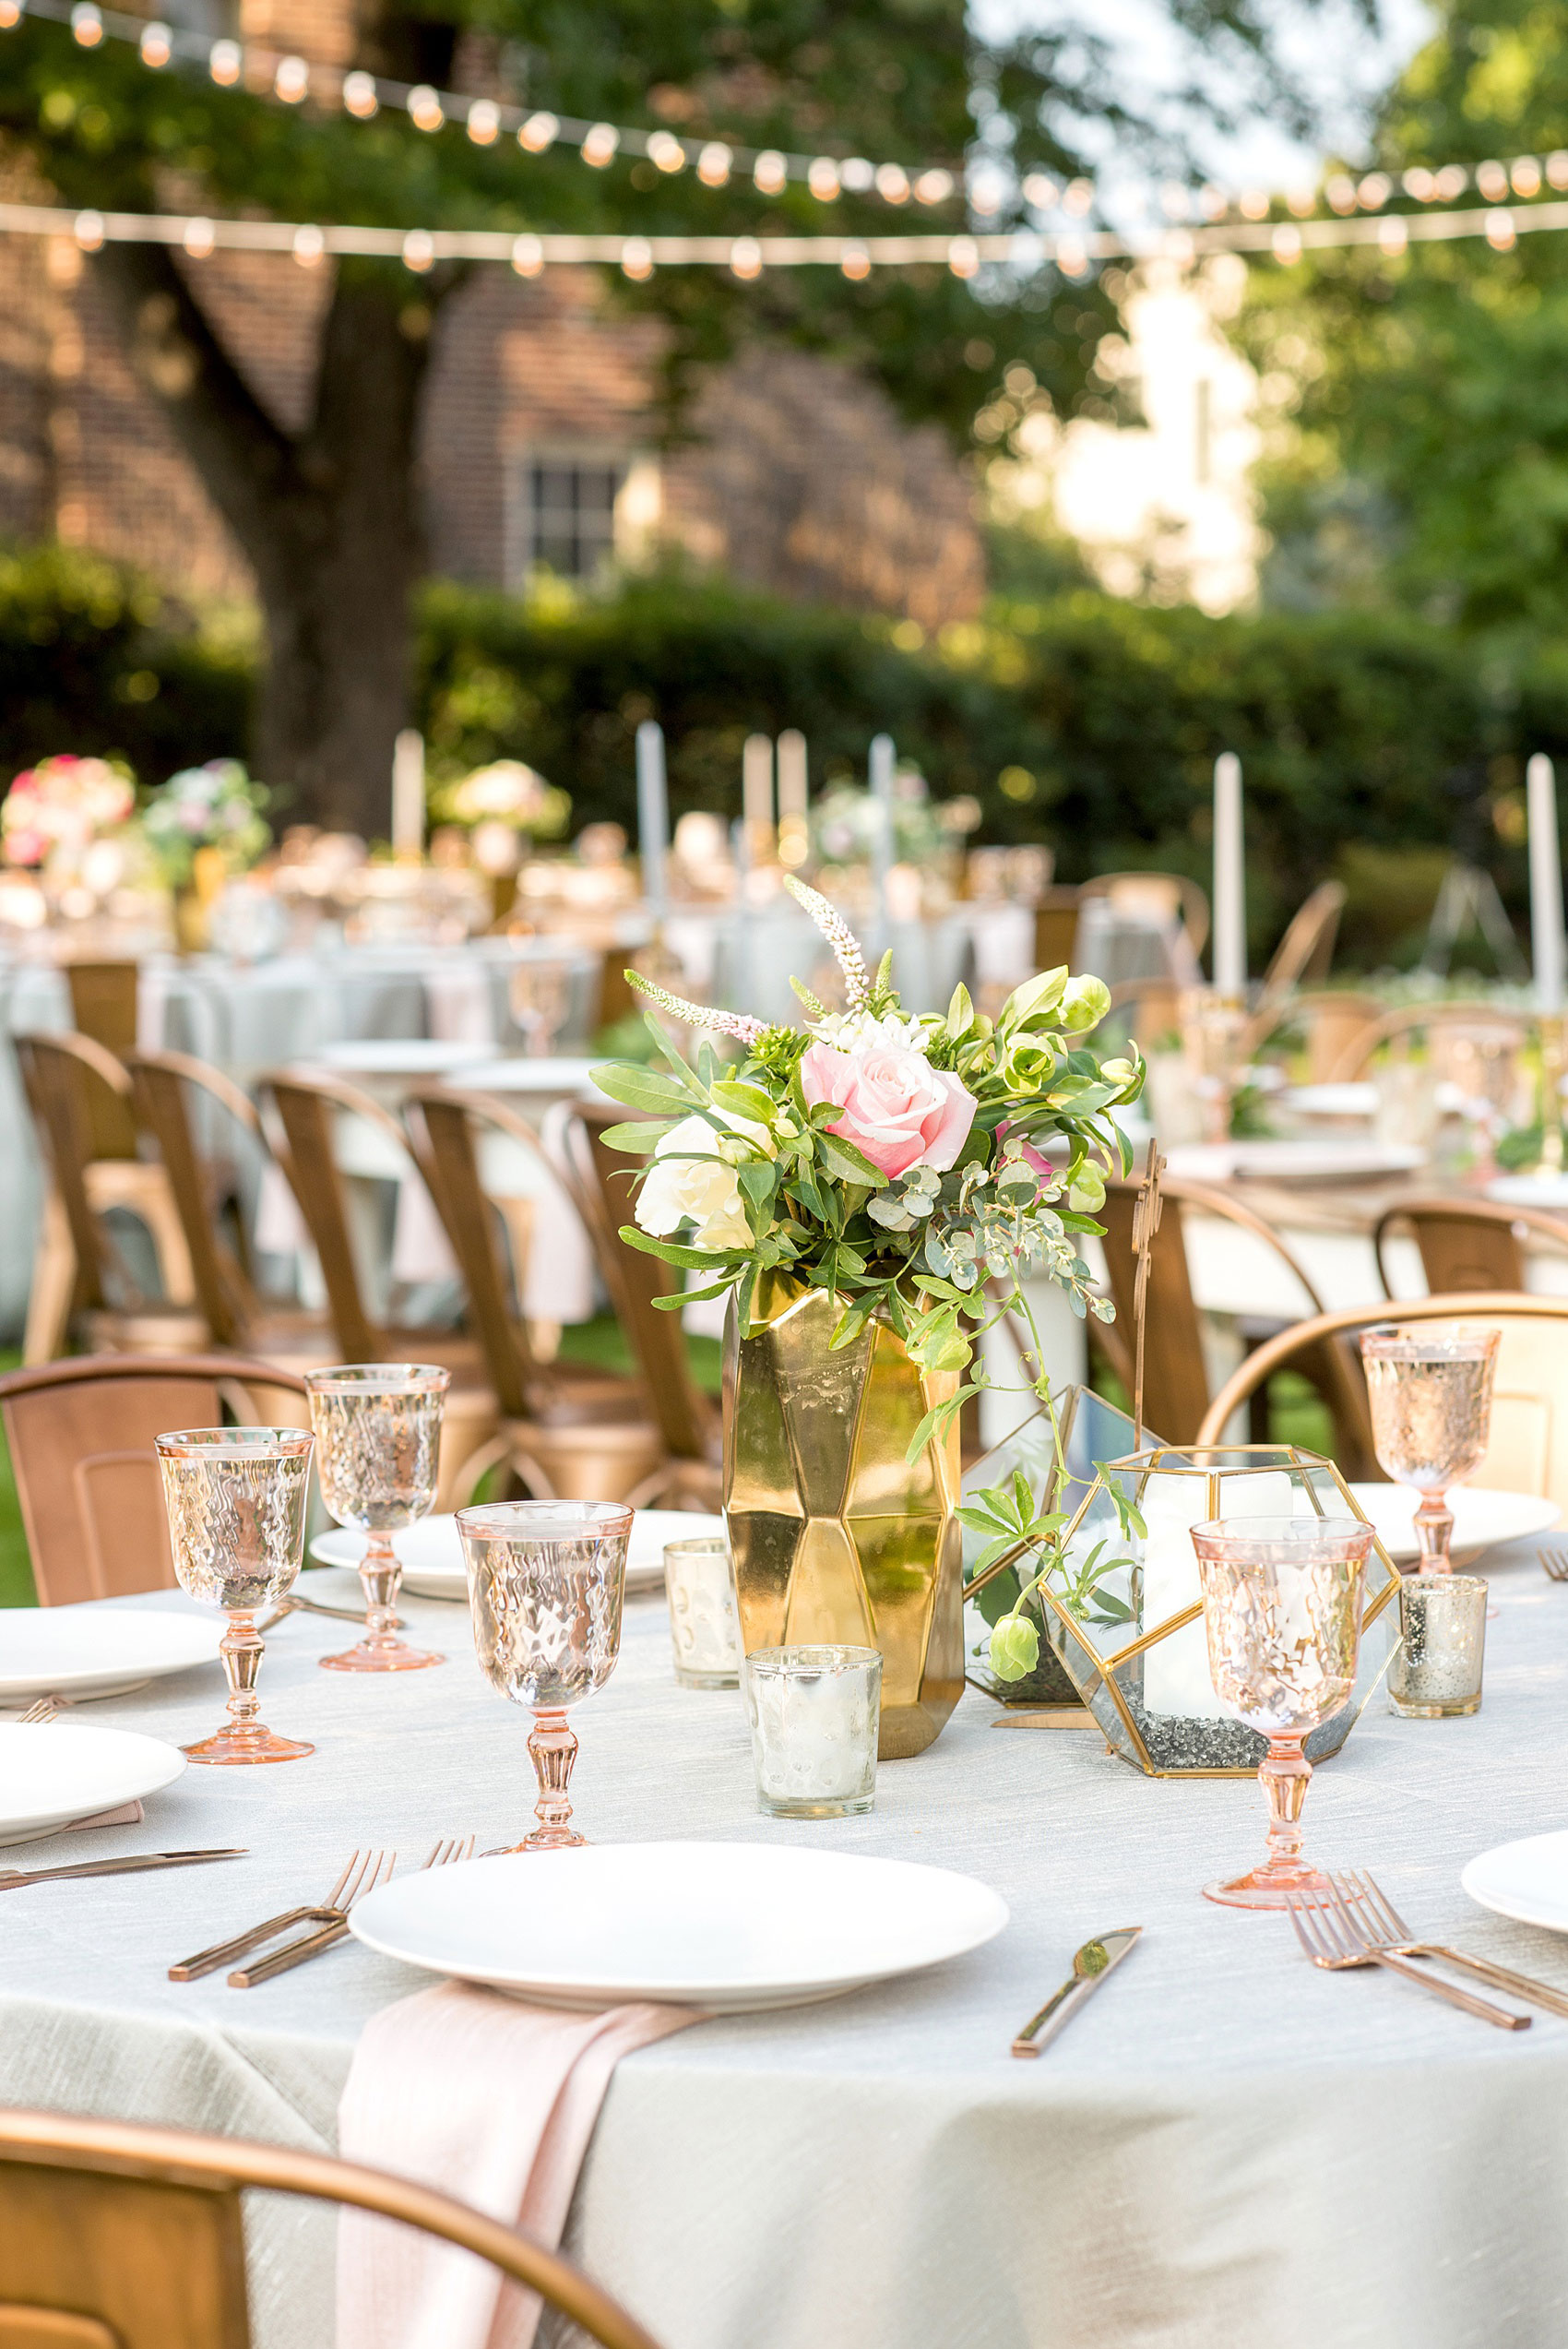 Mikkel Paige Photography pictures from a wedding at Merrimon-Wynne House in Raleigh, NC. Photo of the outdoor reception on the lawn, with round and rectangular farm tables, pink linen napkins, grey plates, and floral centerpieces.